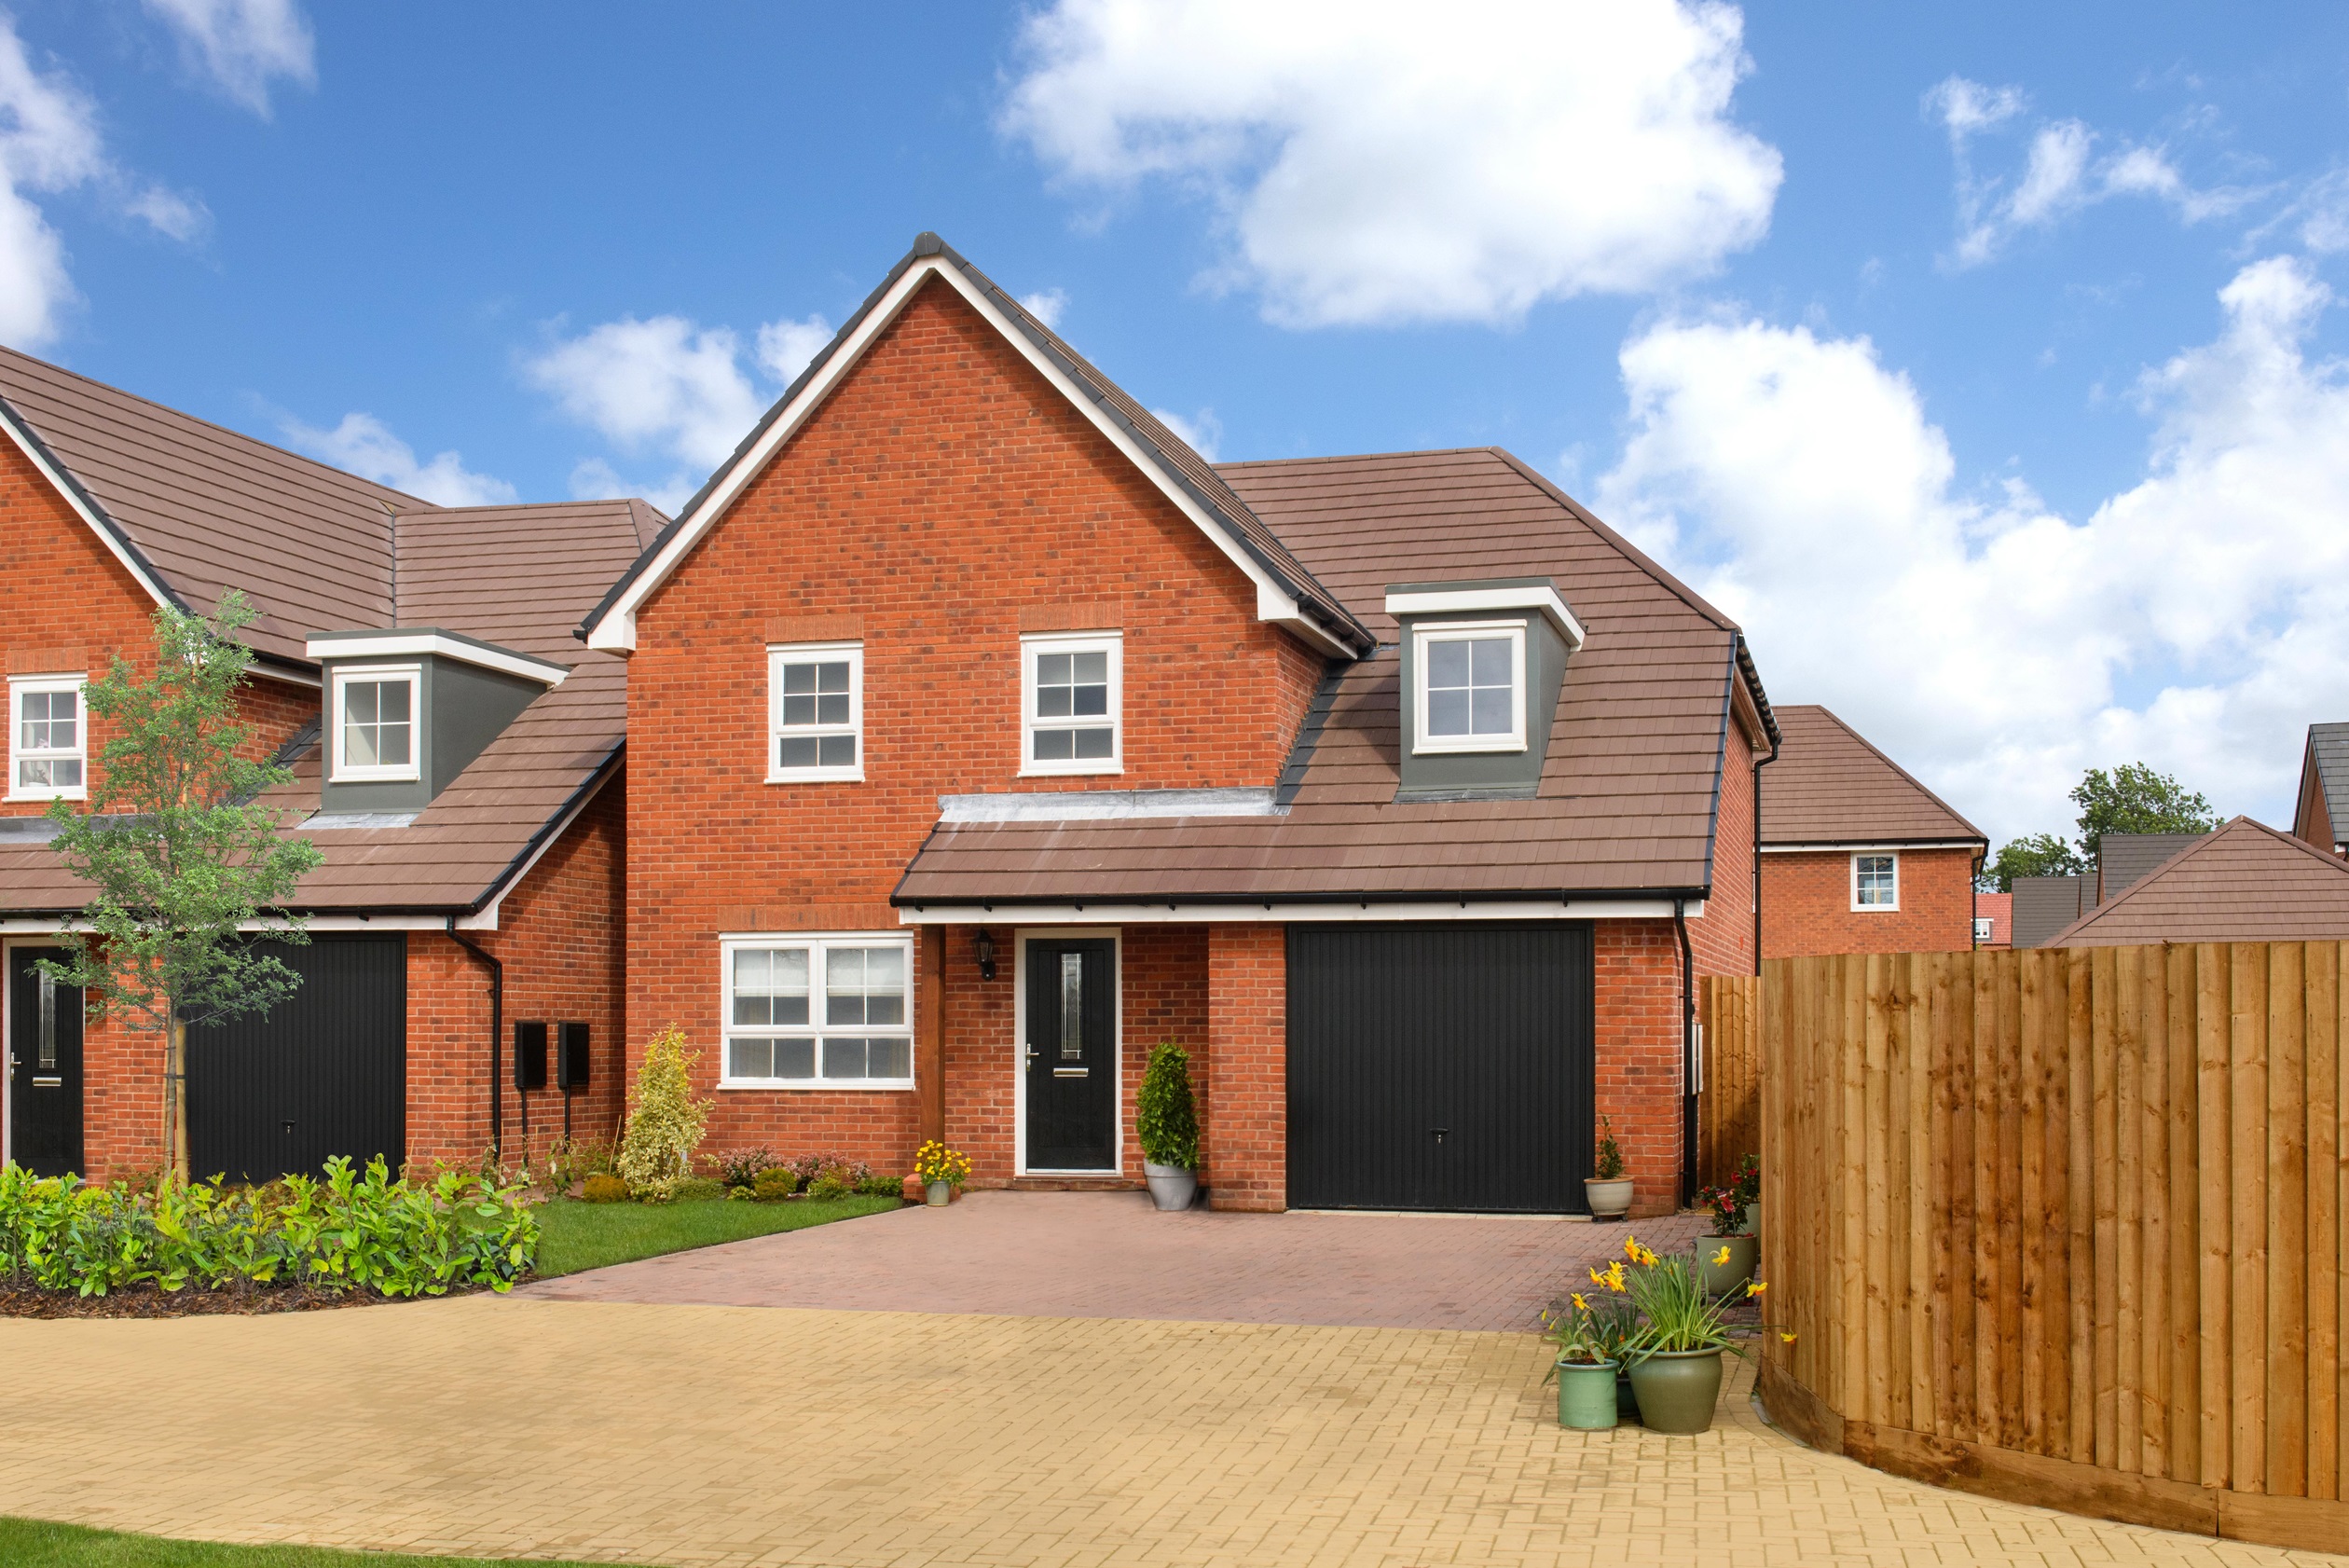 Property 1 of 8. Exterior Image Of Our 4 Bed Ashburton Home